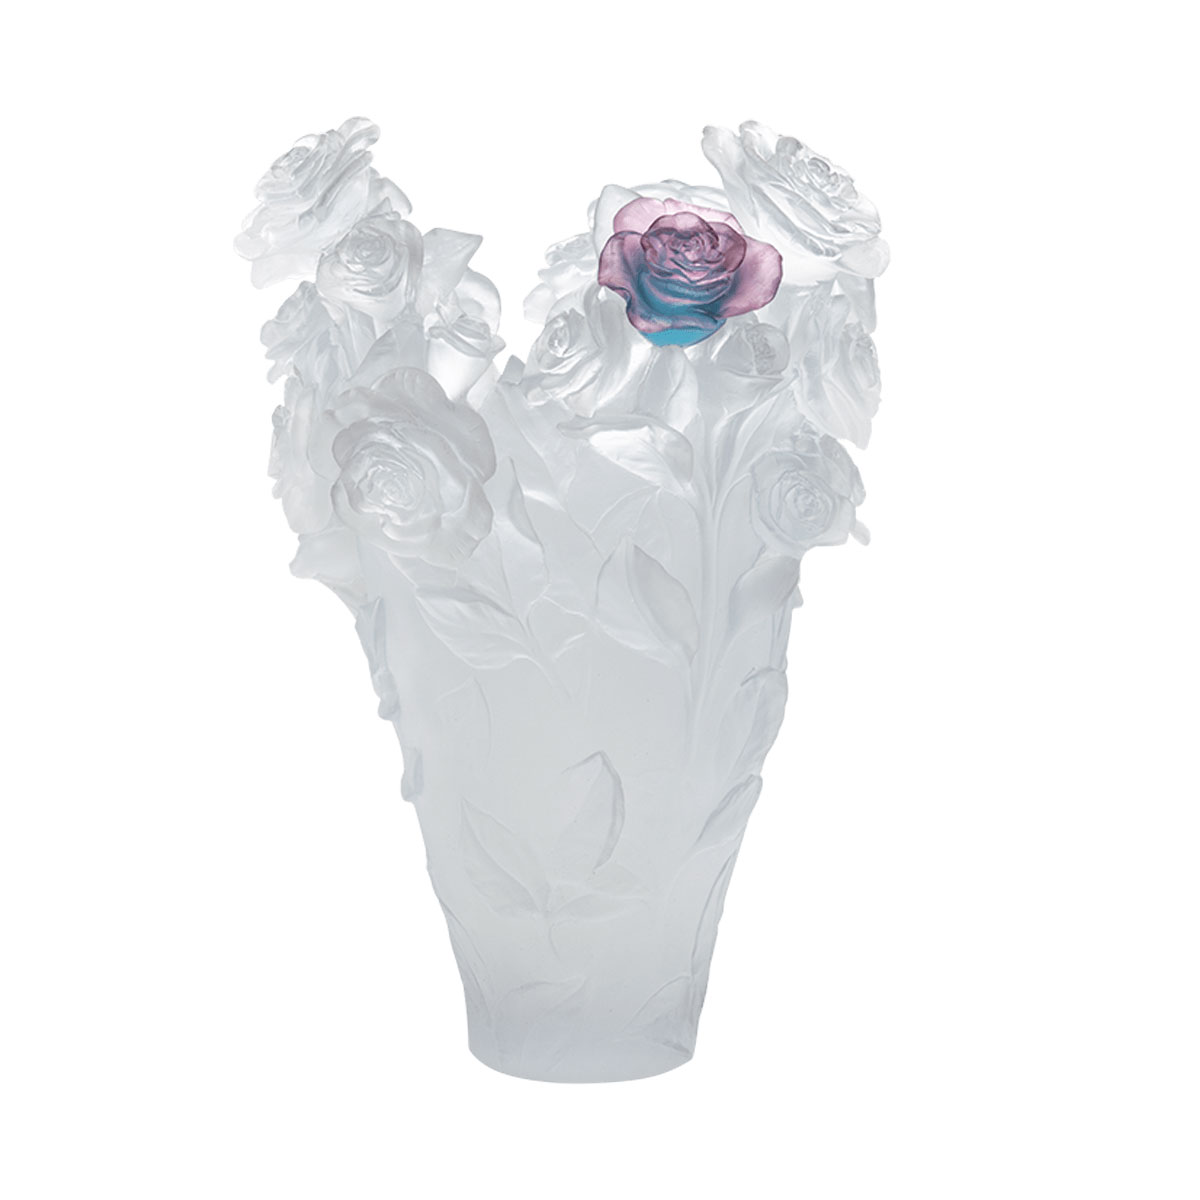 Daum 20.9" Rose Passion Vase in White with Green and Pink Flower, Limited Edition